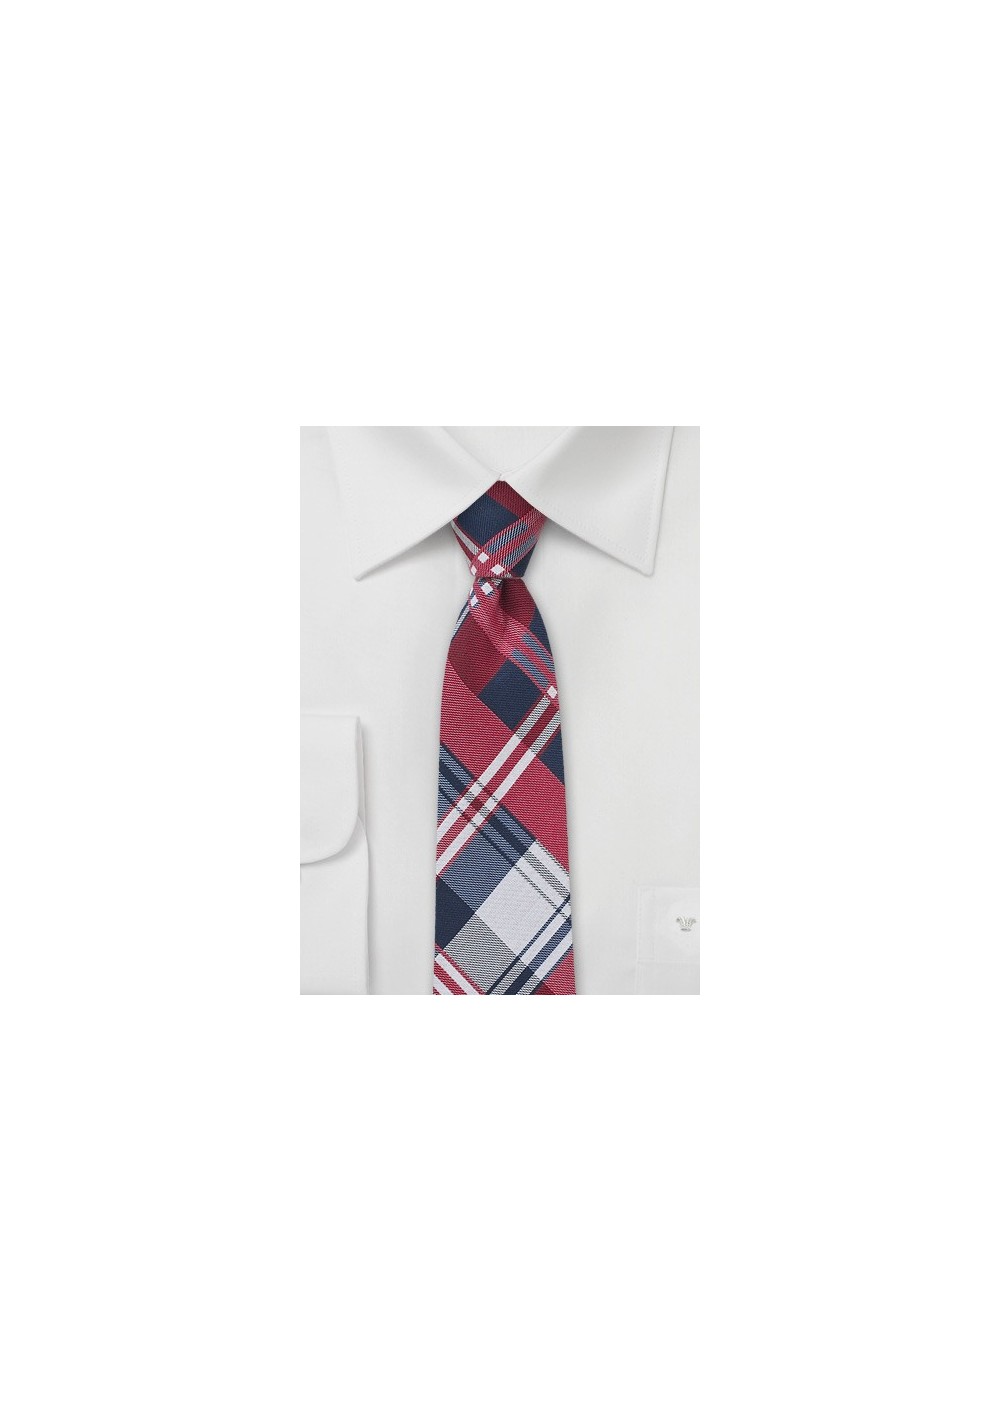 Kids Plaid Tie in Red, Navy, and White